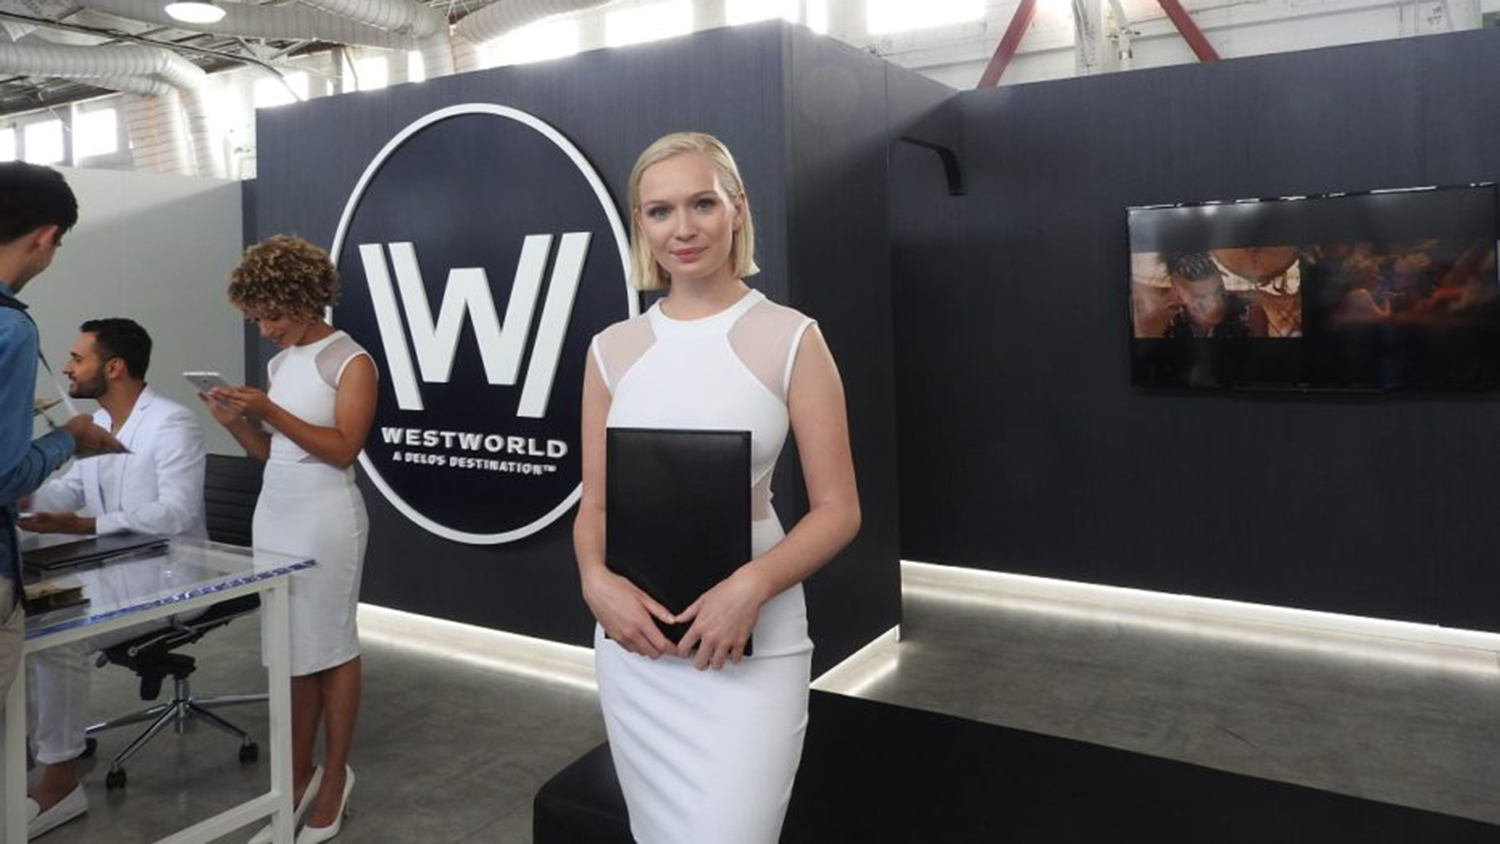 hbo created its own westworld vr experience 04